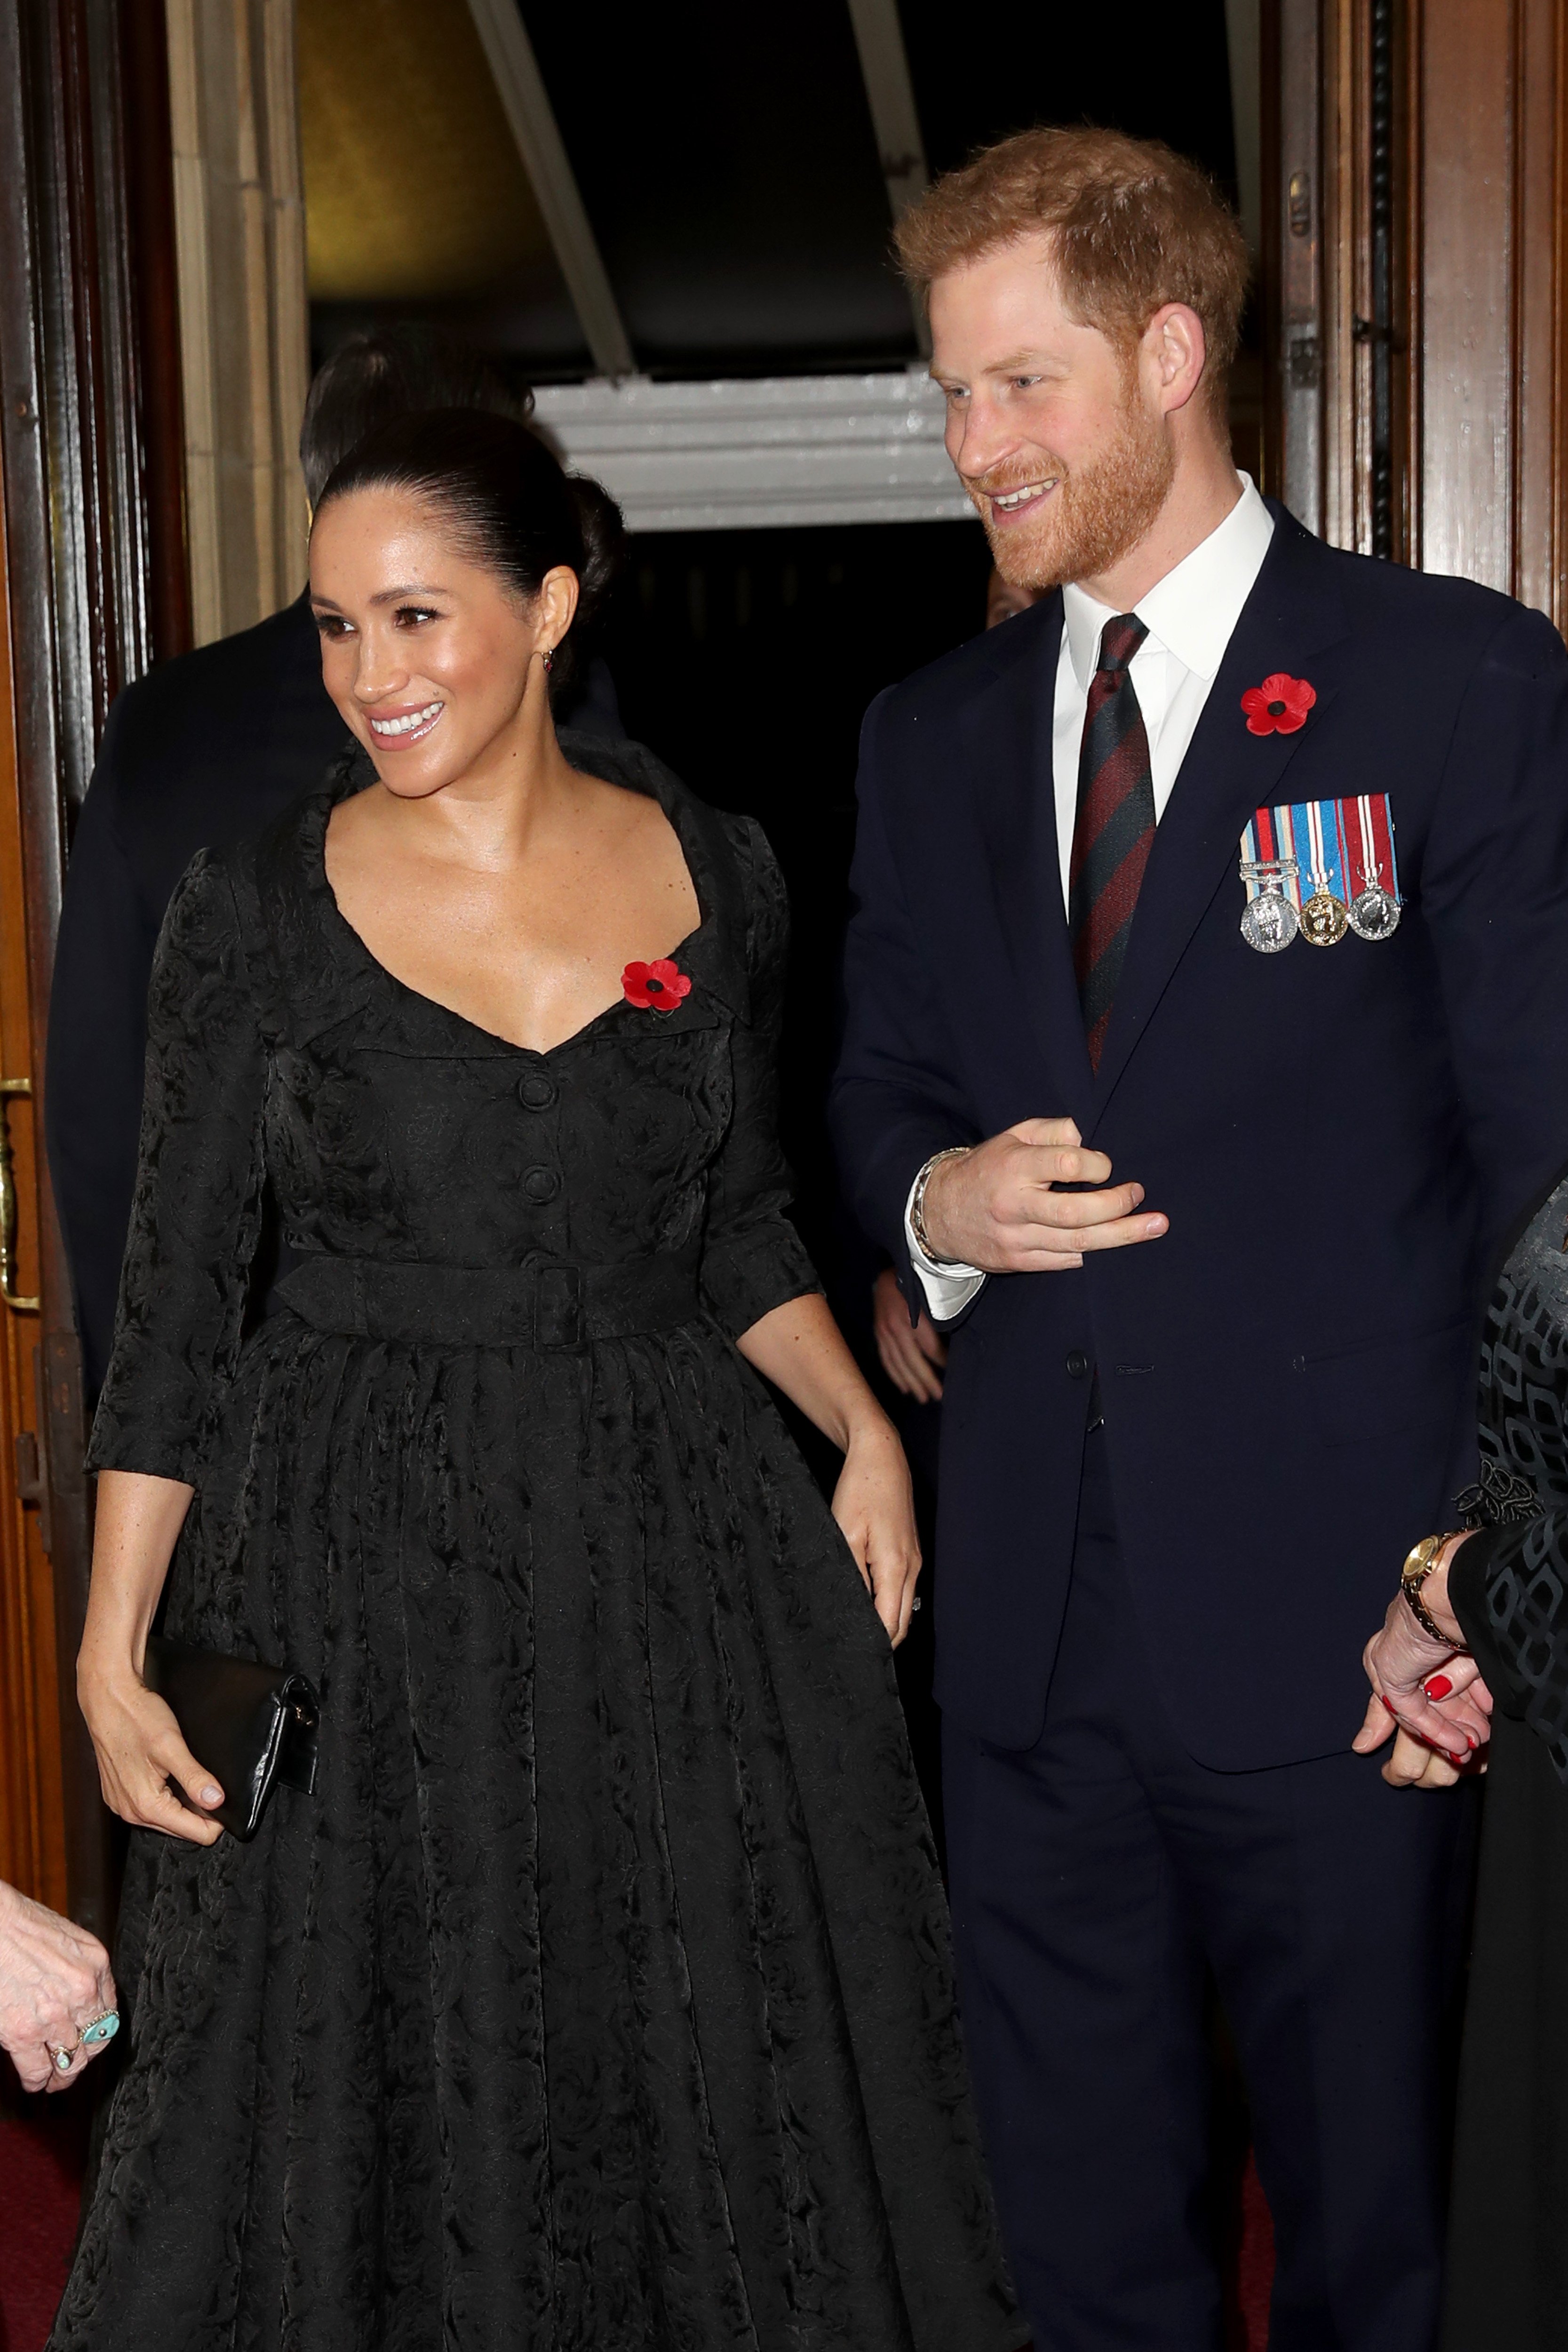  Meghan Markle und Prince Harry beim Festival of Remembrance in London, England am 9. November 2019 | Quelle: Getty Images